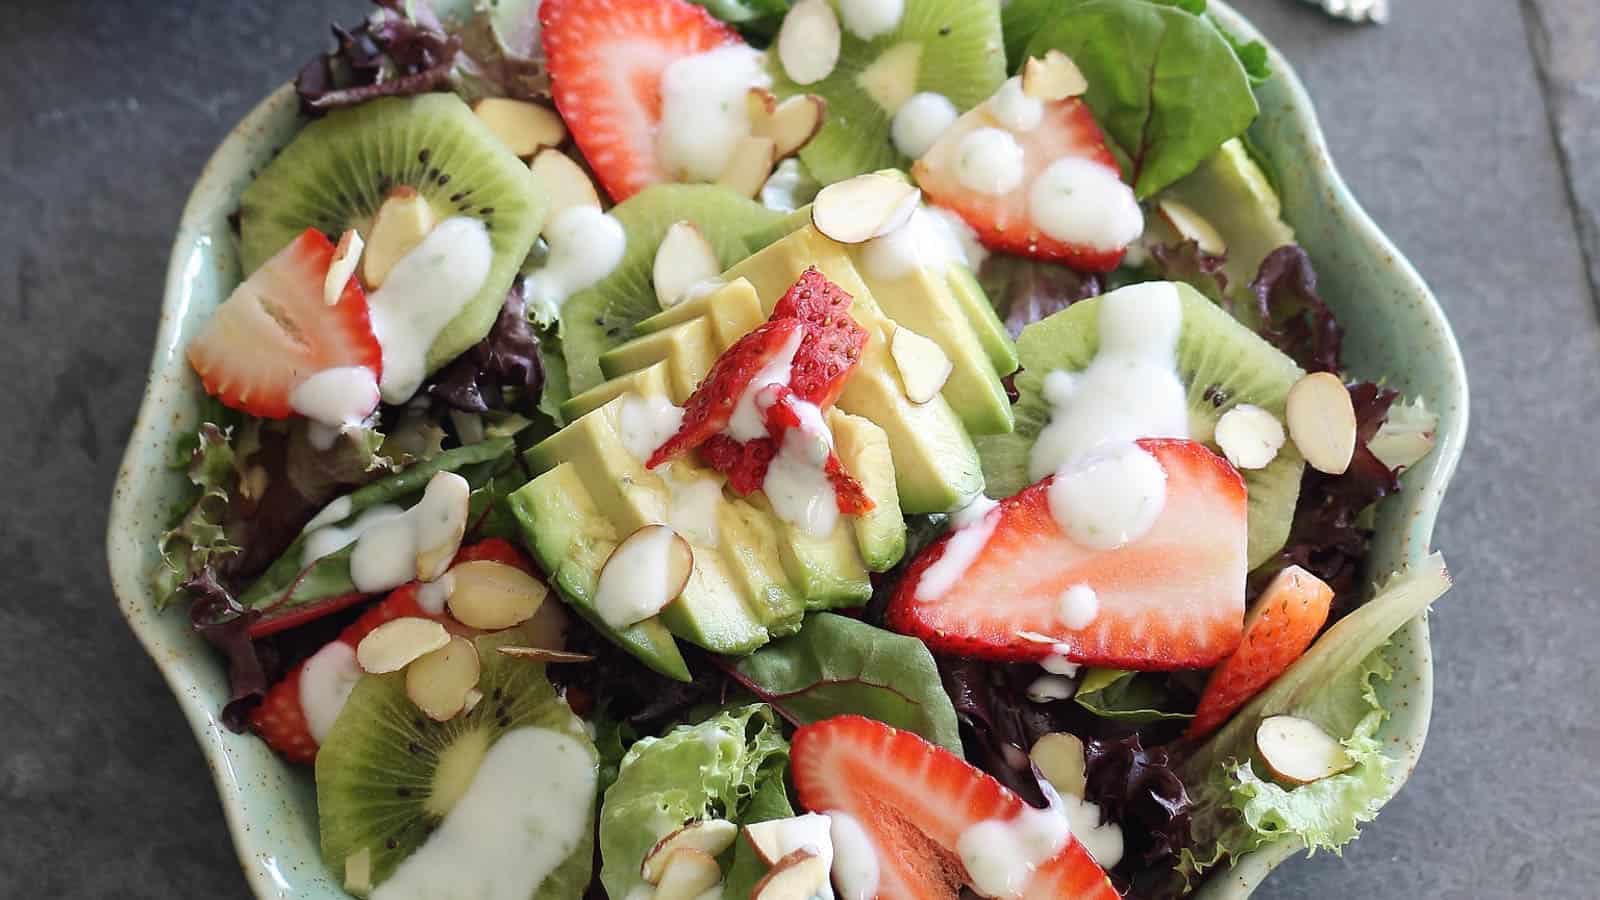 Strawberry avocado honey lime salad in a teal scalloped plate.